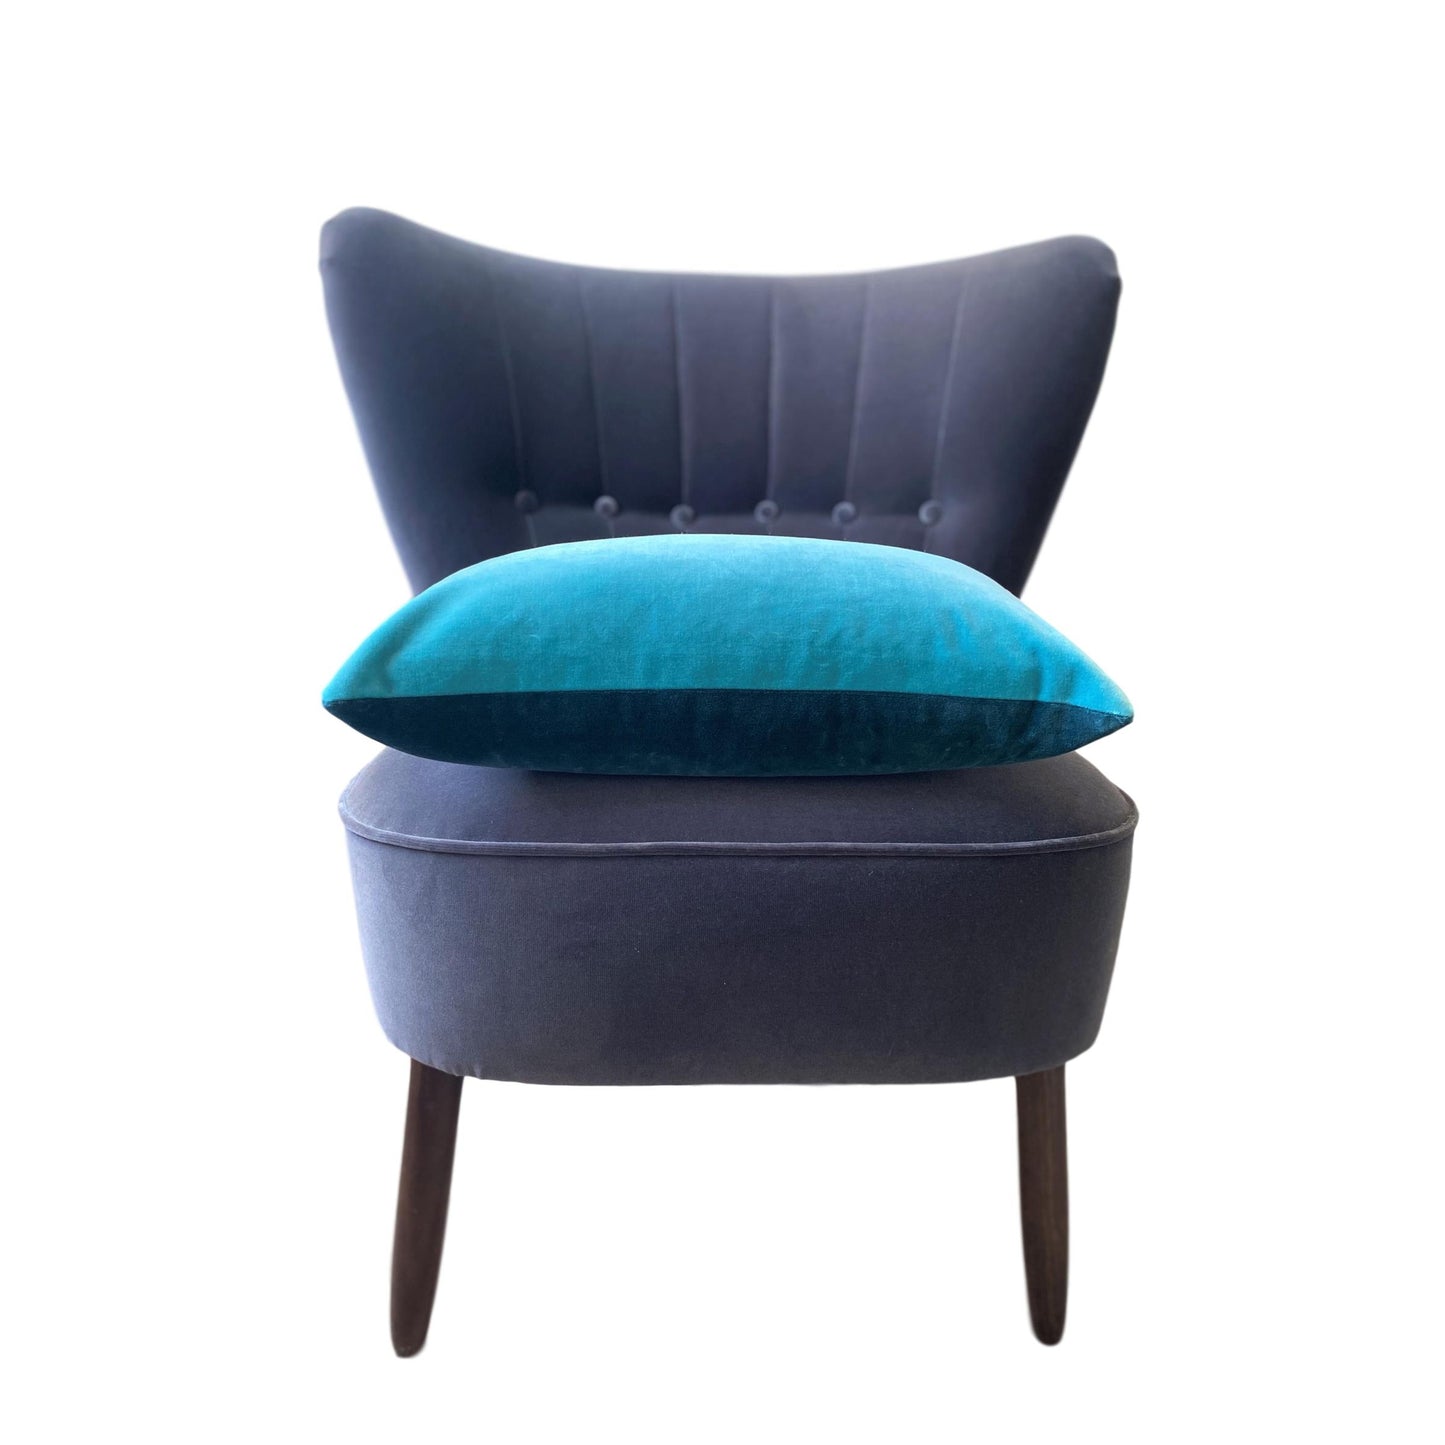 Teal Velvet Cushion Cover with Turquoise